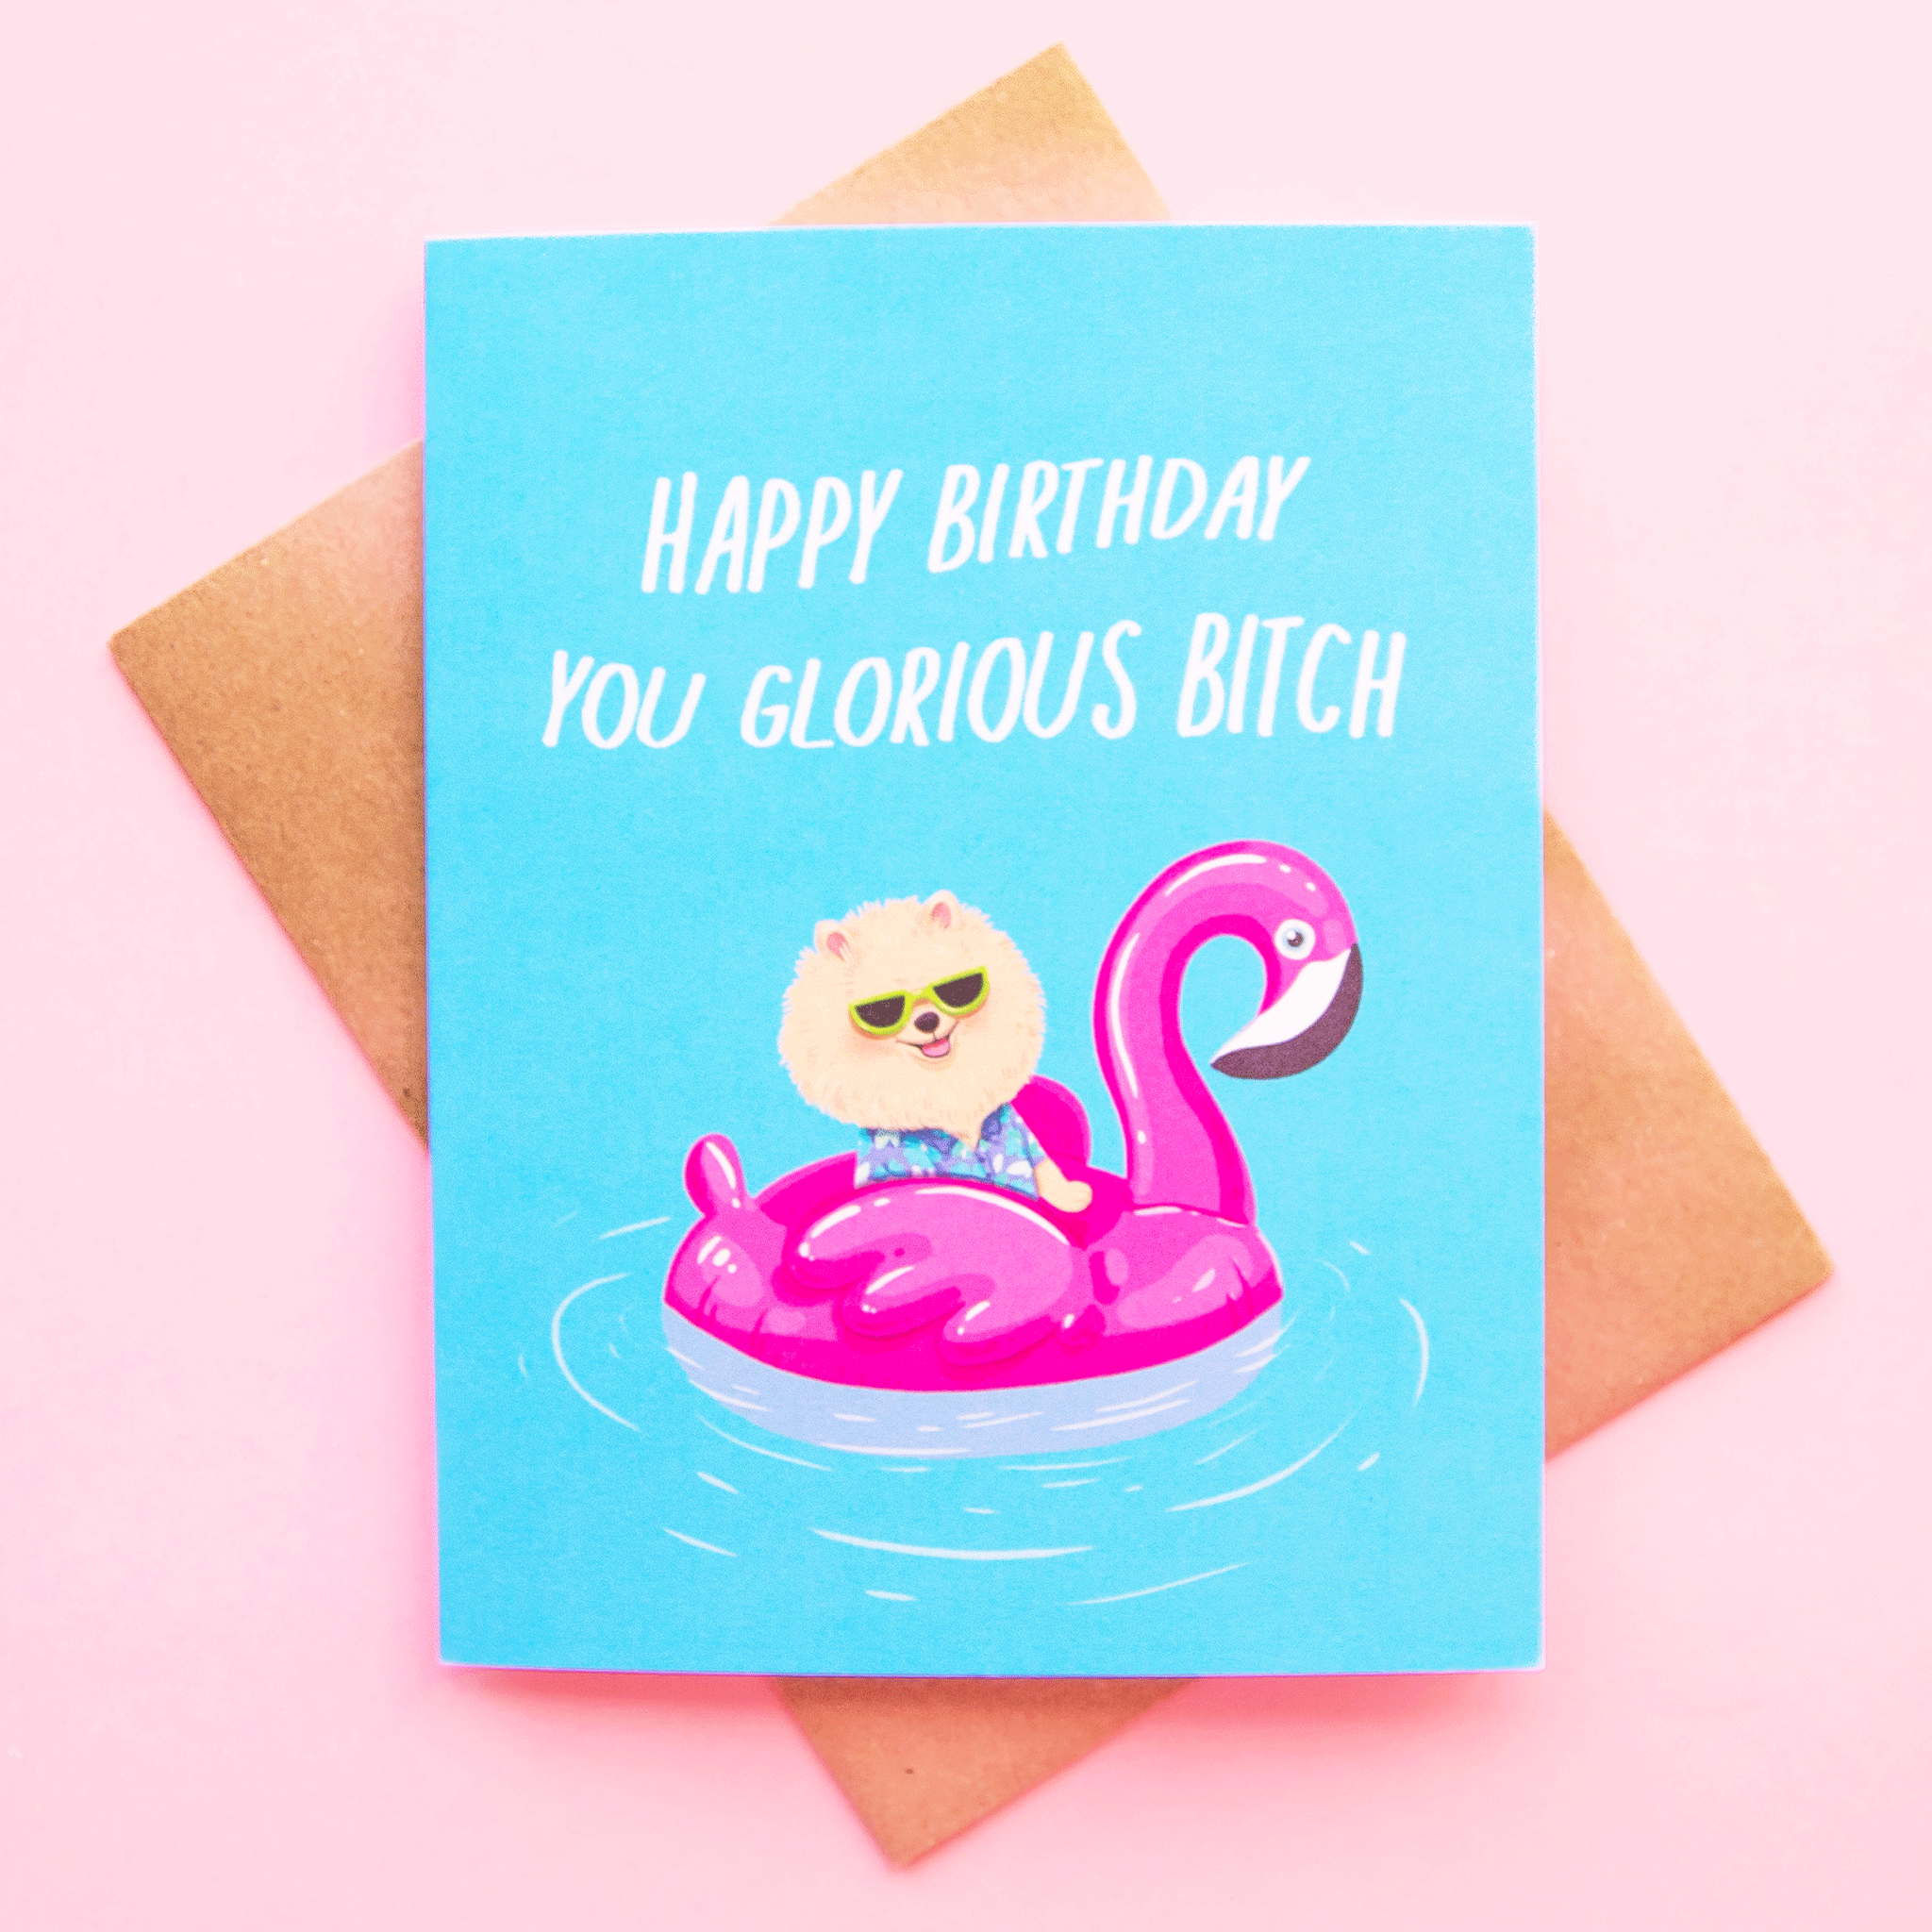 On a pink background is a bright blue card with an illustration of a Pomeranian in sunglasses on a pink pool float and white text that reads, "Happy Birthday You Glorious Bitch".